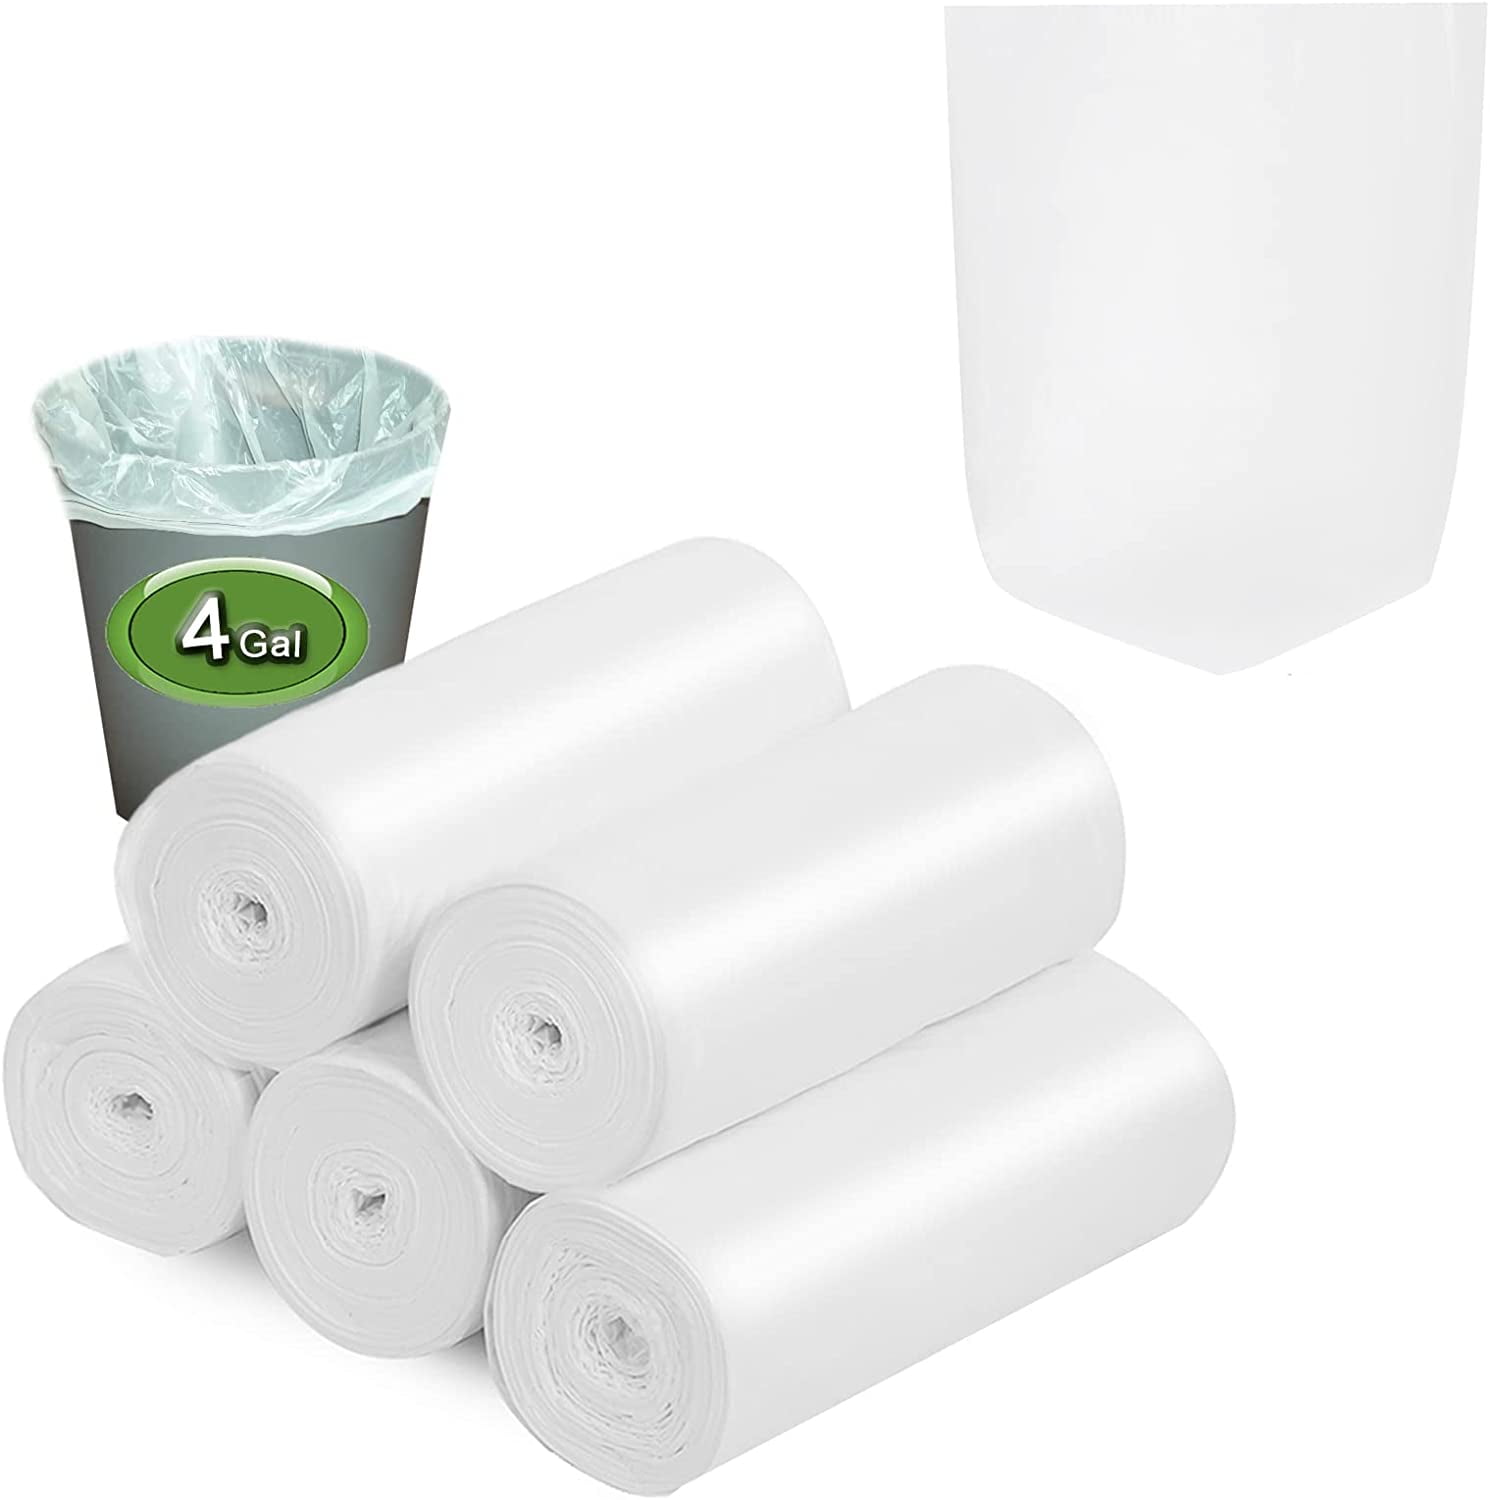 Yogui Home Living 10 Gallon Clear Trash Bags (200 Count) + Rev-A-Shelf  35-Quart (9-Gallon - 1 Pack). Indoor Garbage Bin for Kitchen, Home, Office  and